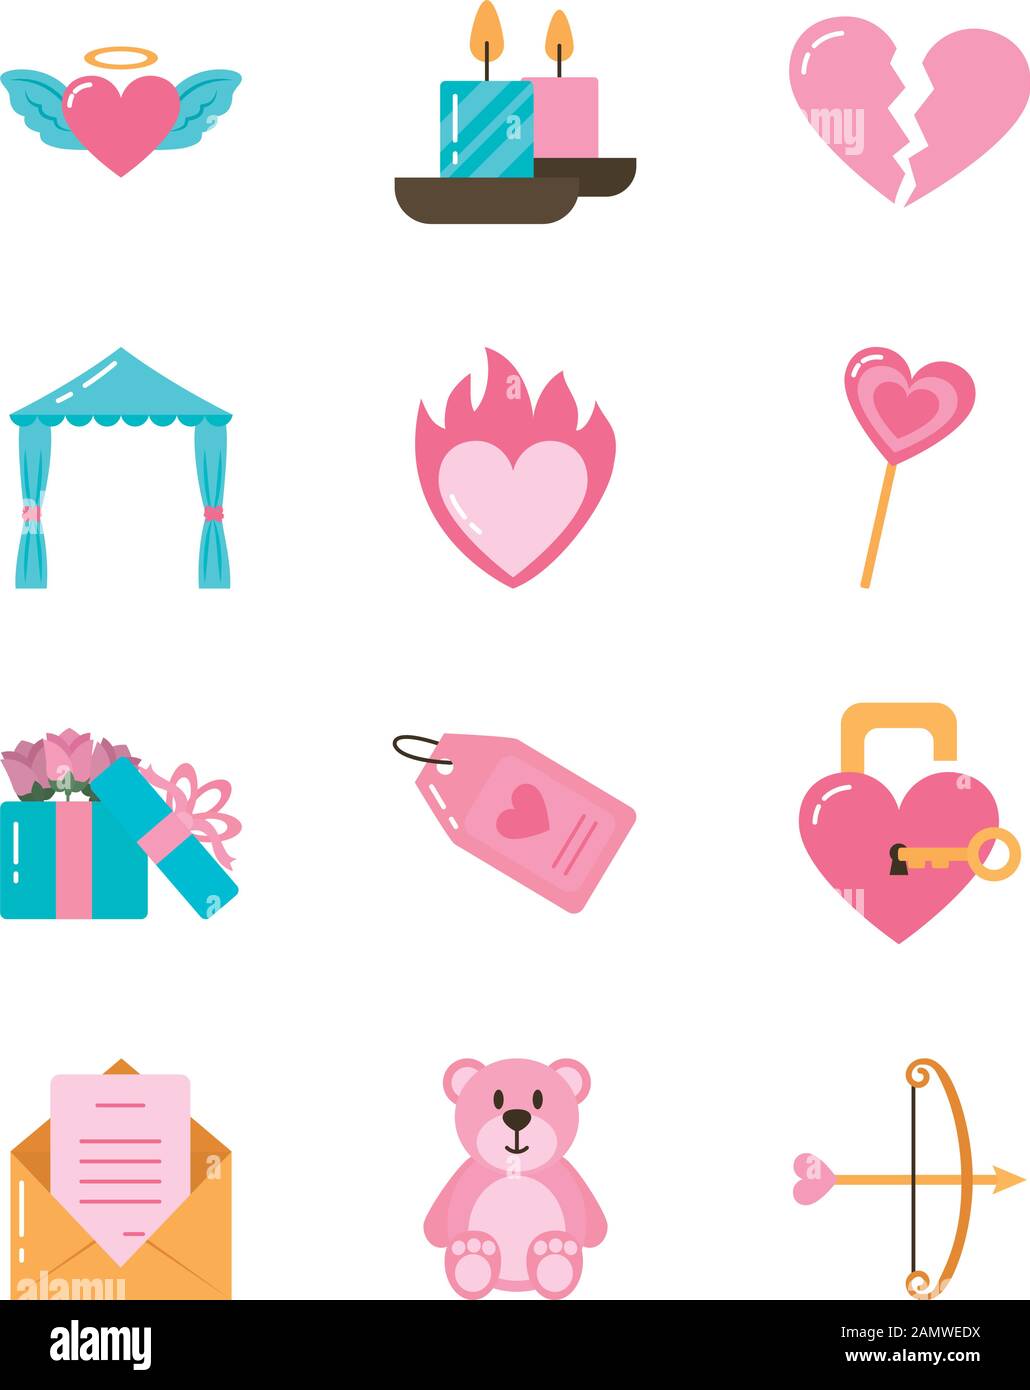 Love and valentines day icon set vector design Stock Vector